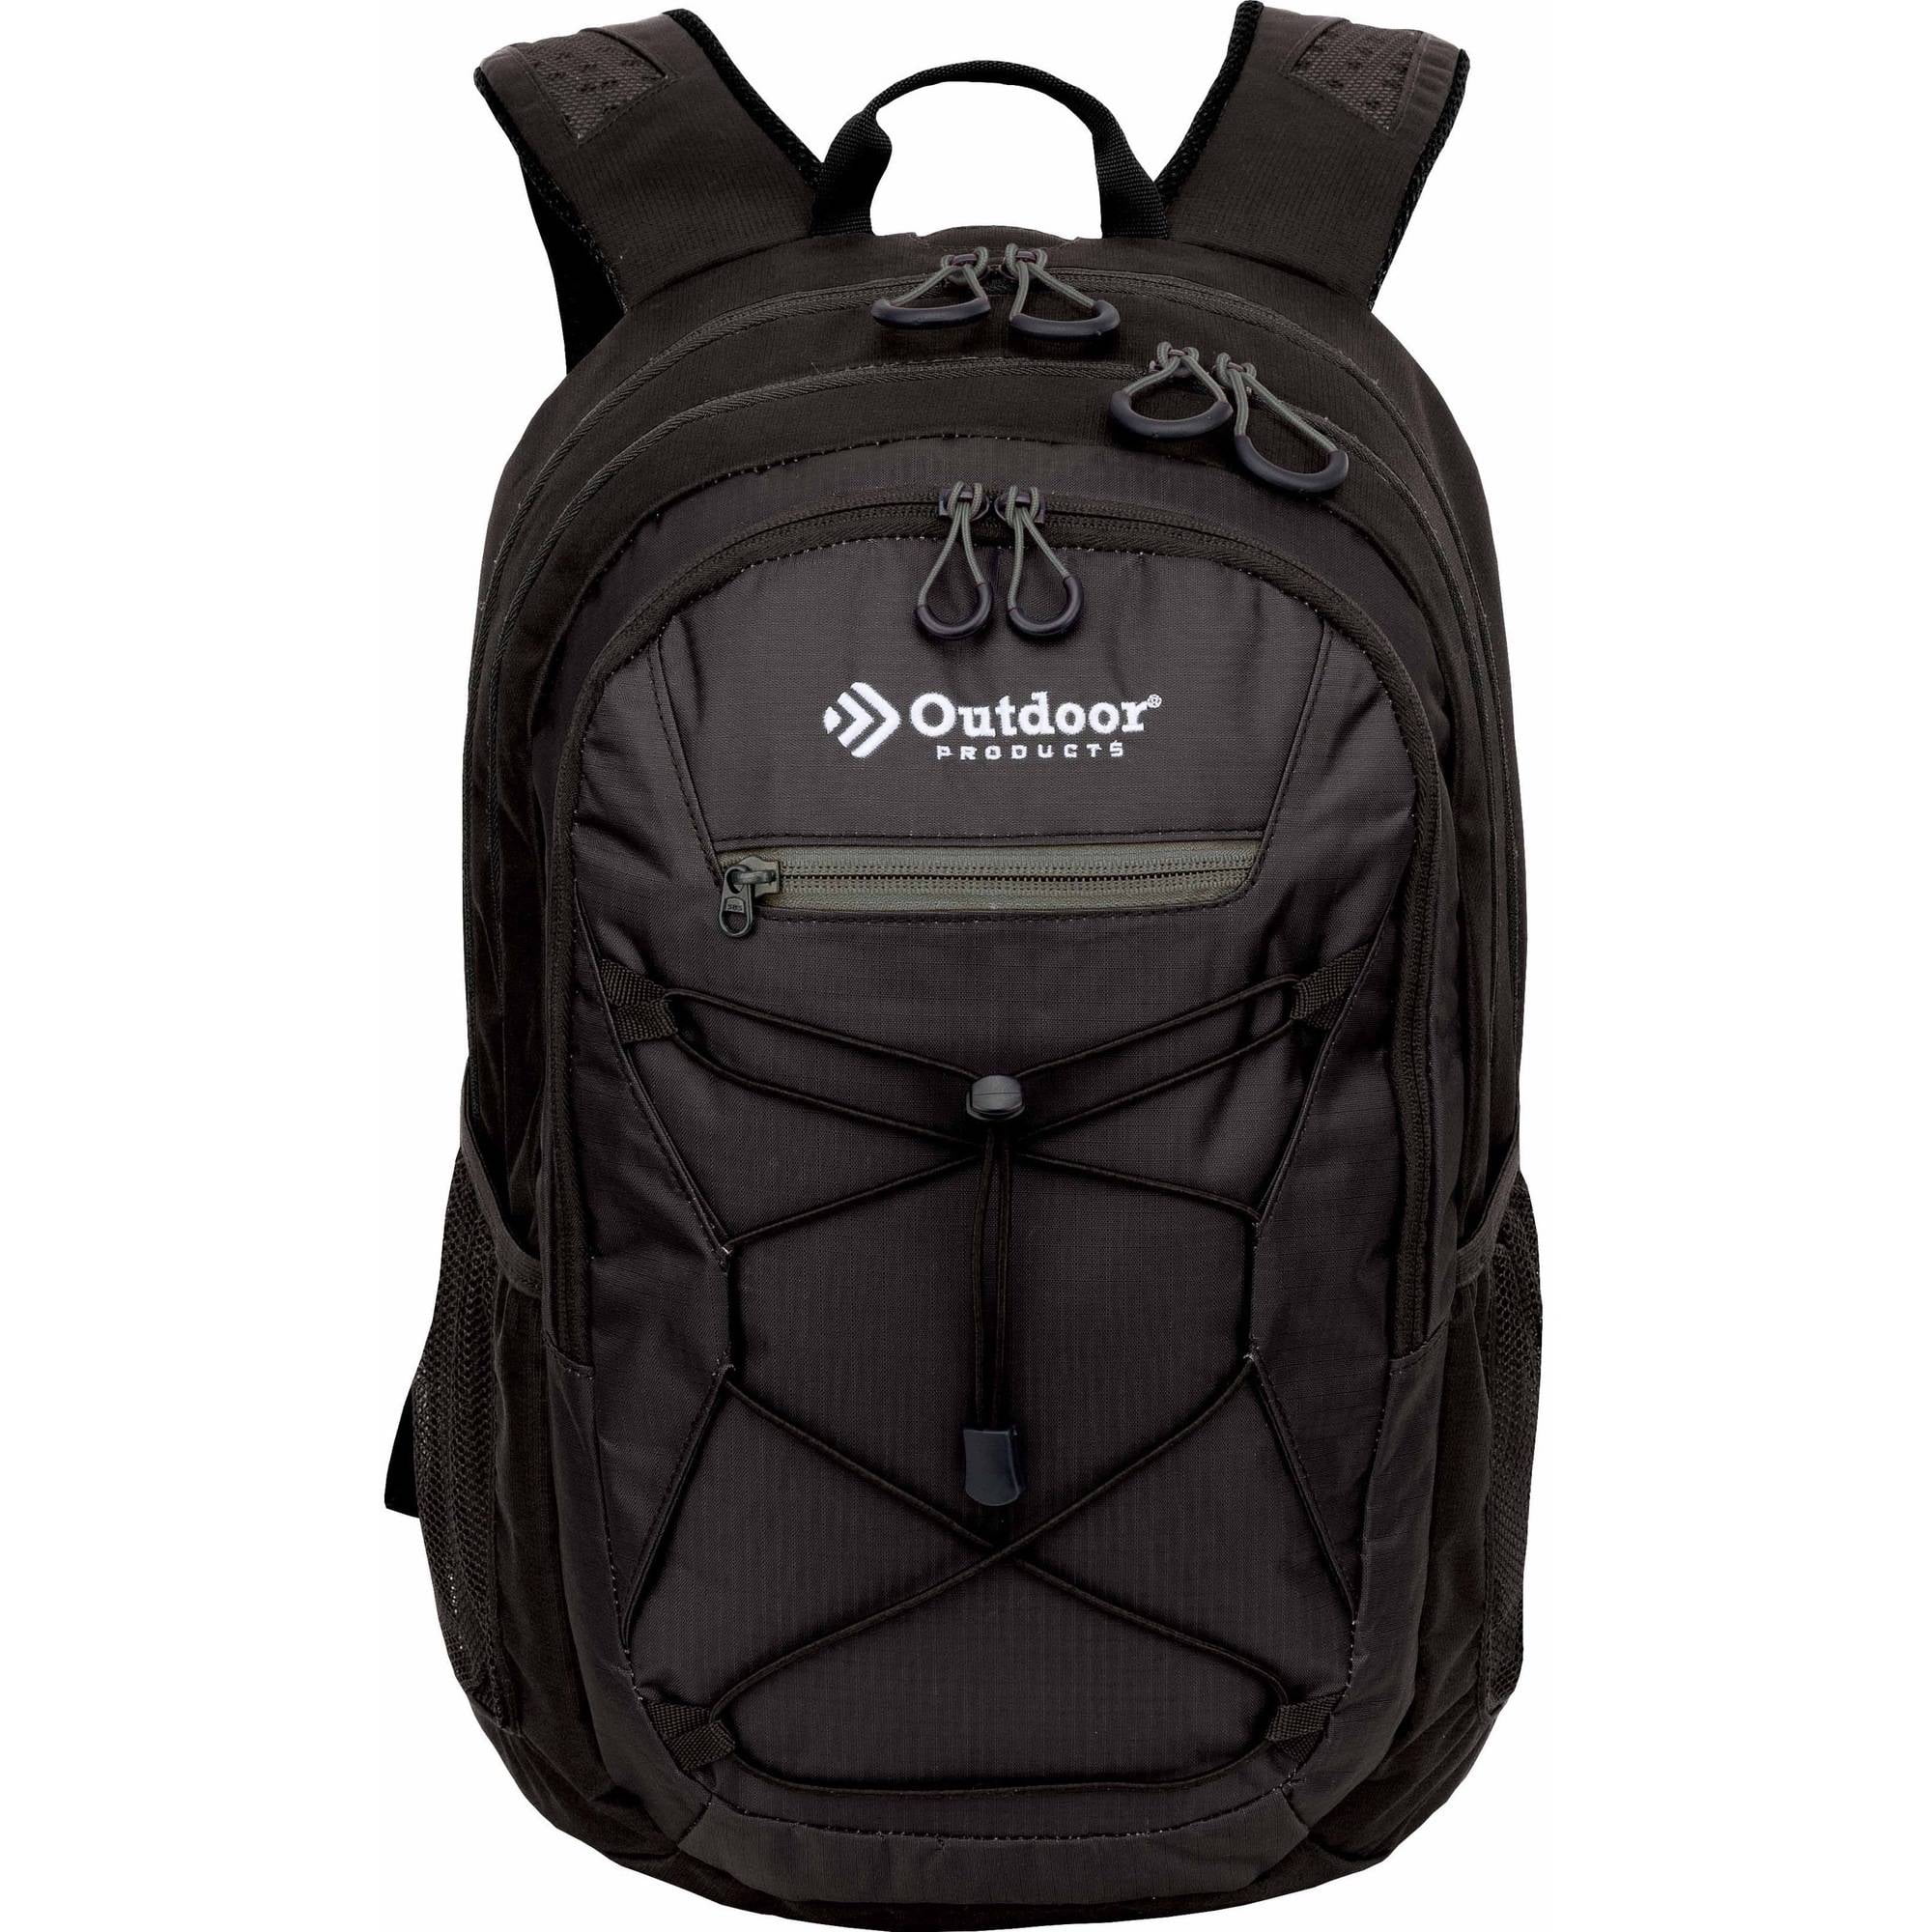 Outdoor Products Odyssey 29 Ltr Backpack Daypack, Blue, Unisex